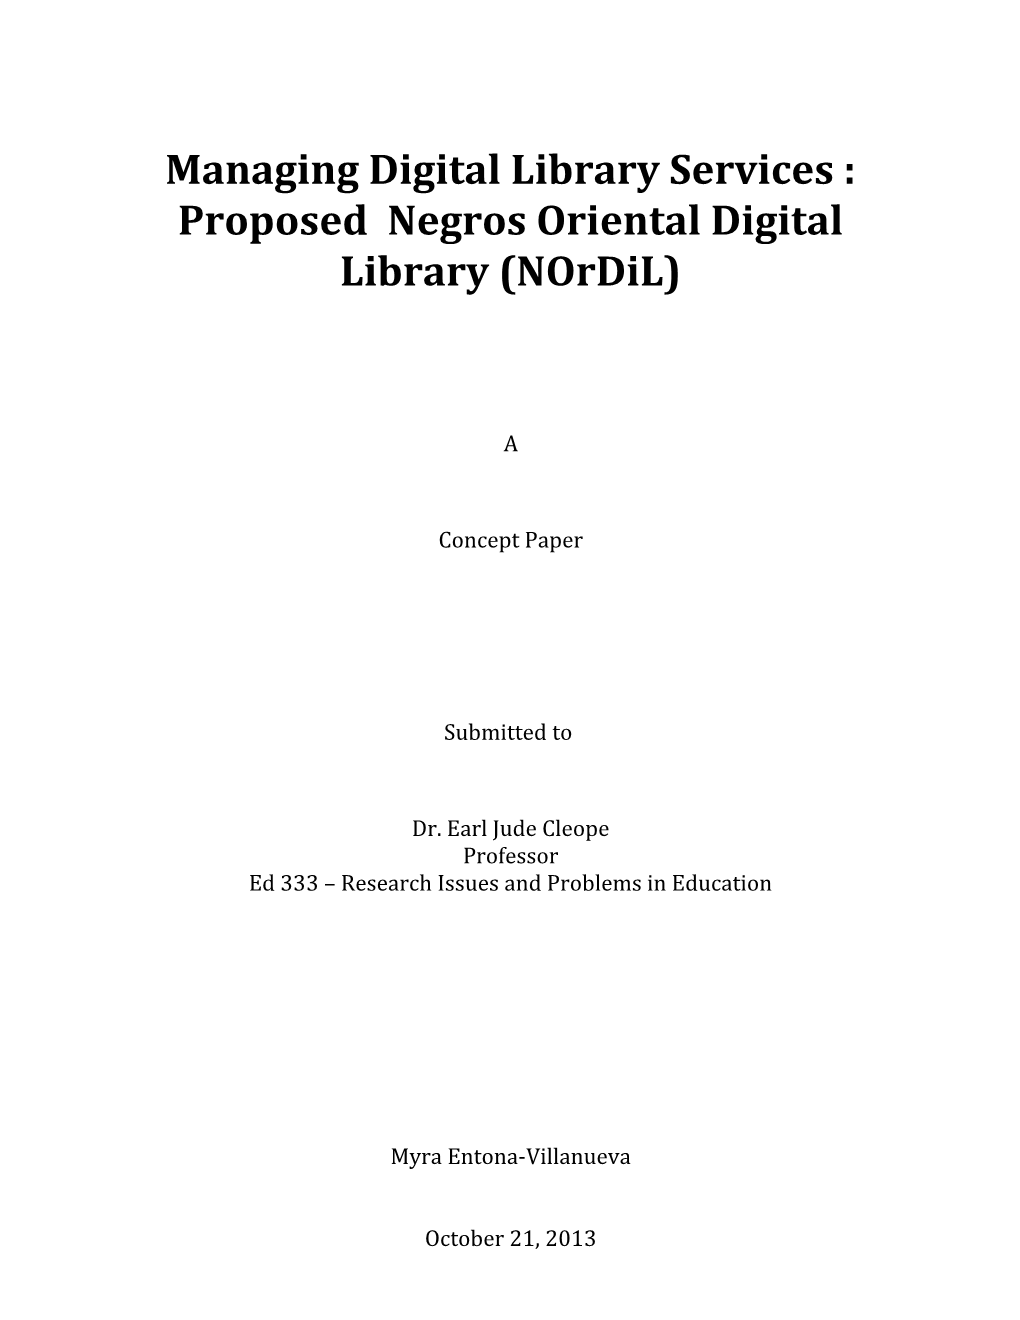 Managing Digital Library Services : Proposed Negros Oriental Digital Library (Nordil)